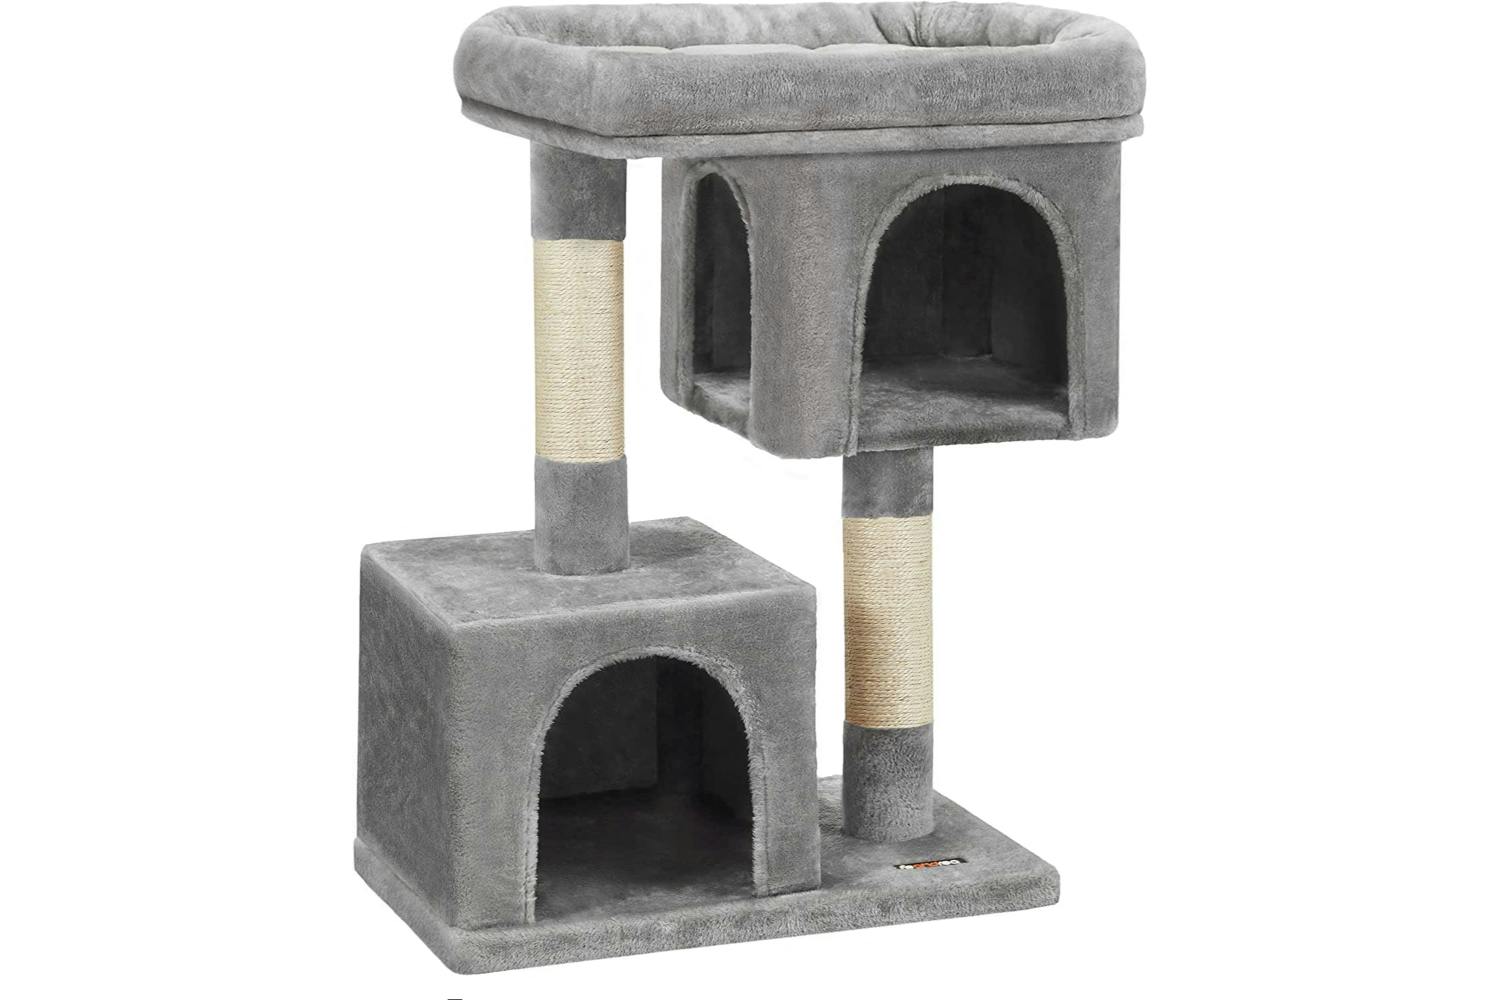 Feandrea Pct61wv1 Cat Tree With Large Platform And 2 Plush C